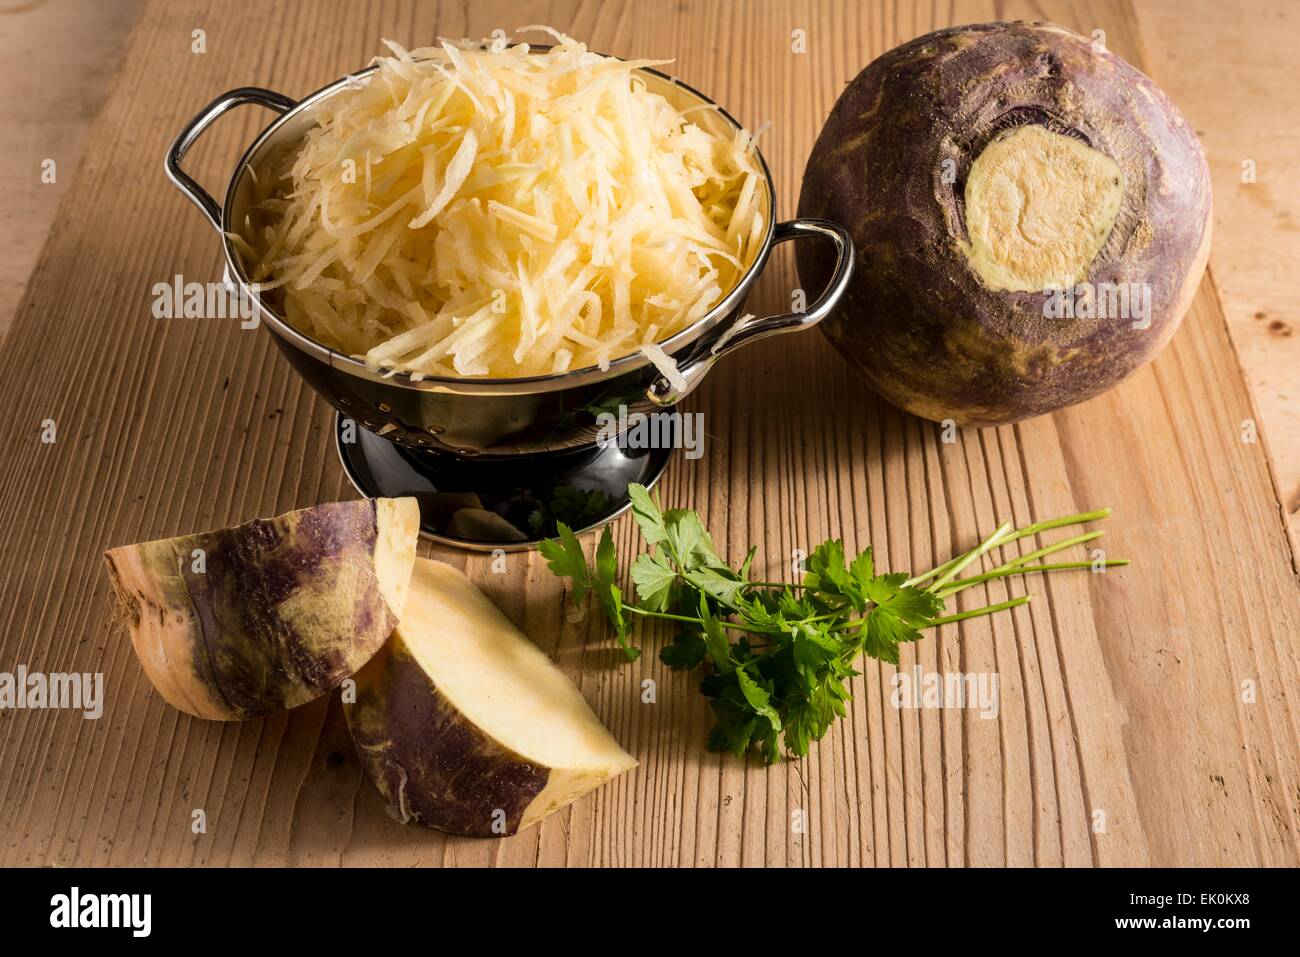 nobody, no one, no-one, healthy eating, fresh, food, food and drink, still life, studio shot, studio shots, swede, grated, raw, vegetable, root vegetable Stock Photo